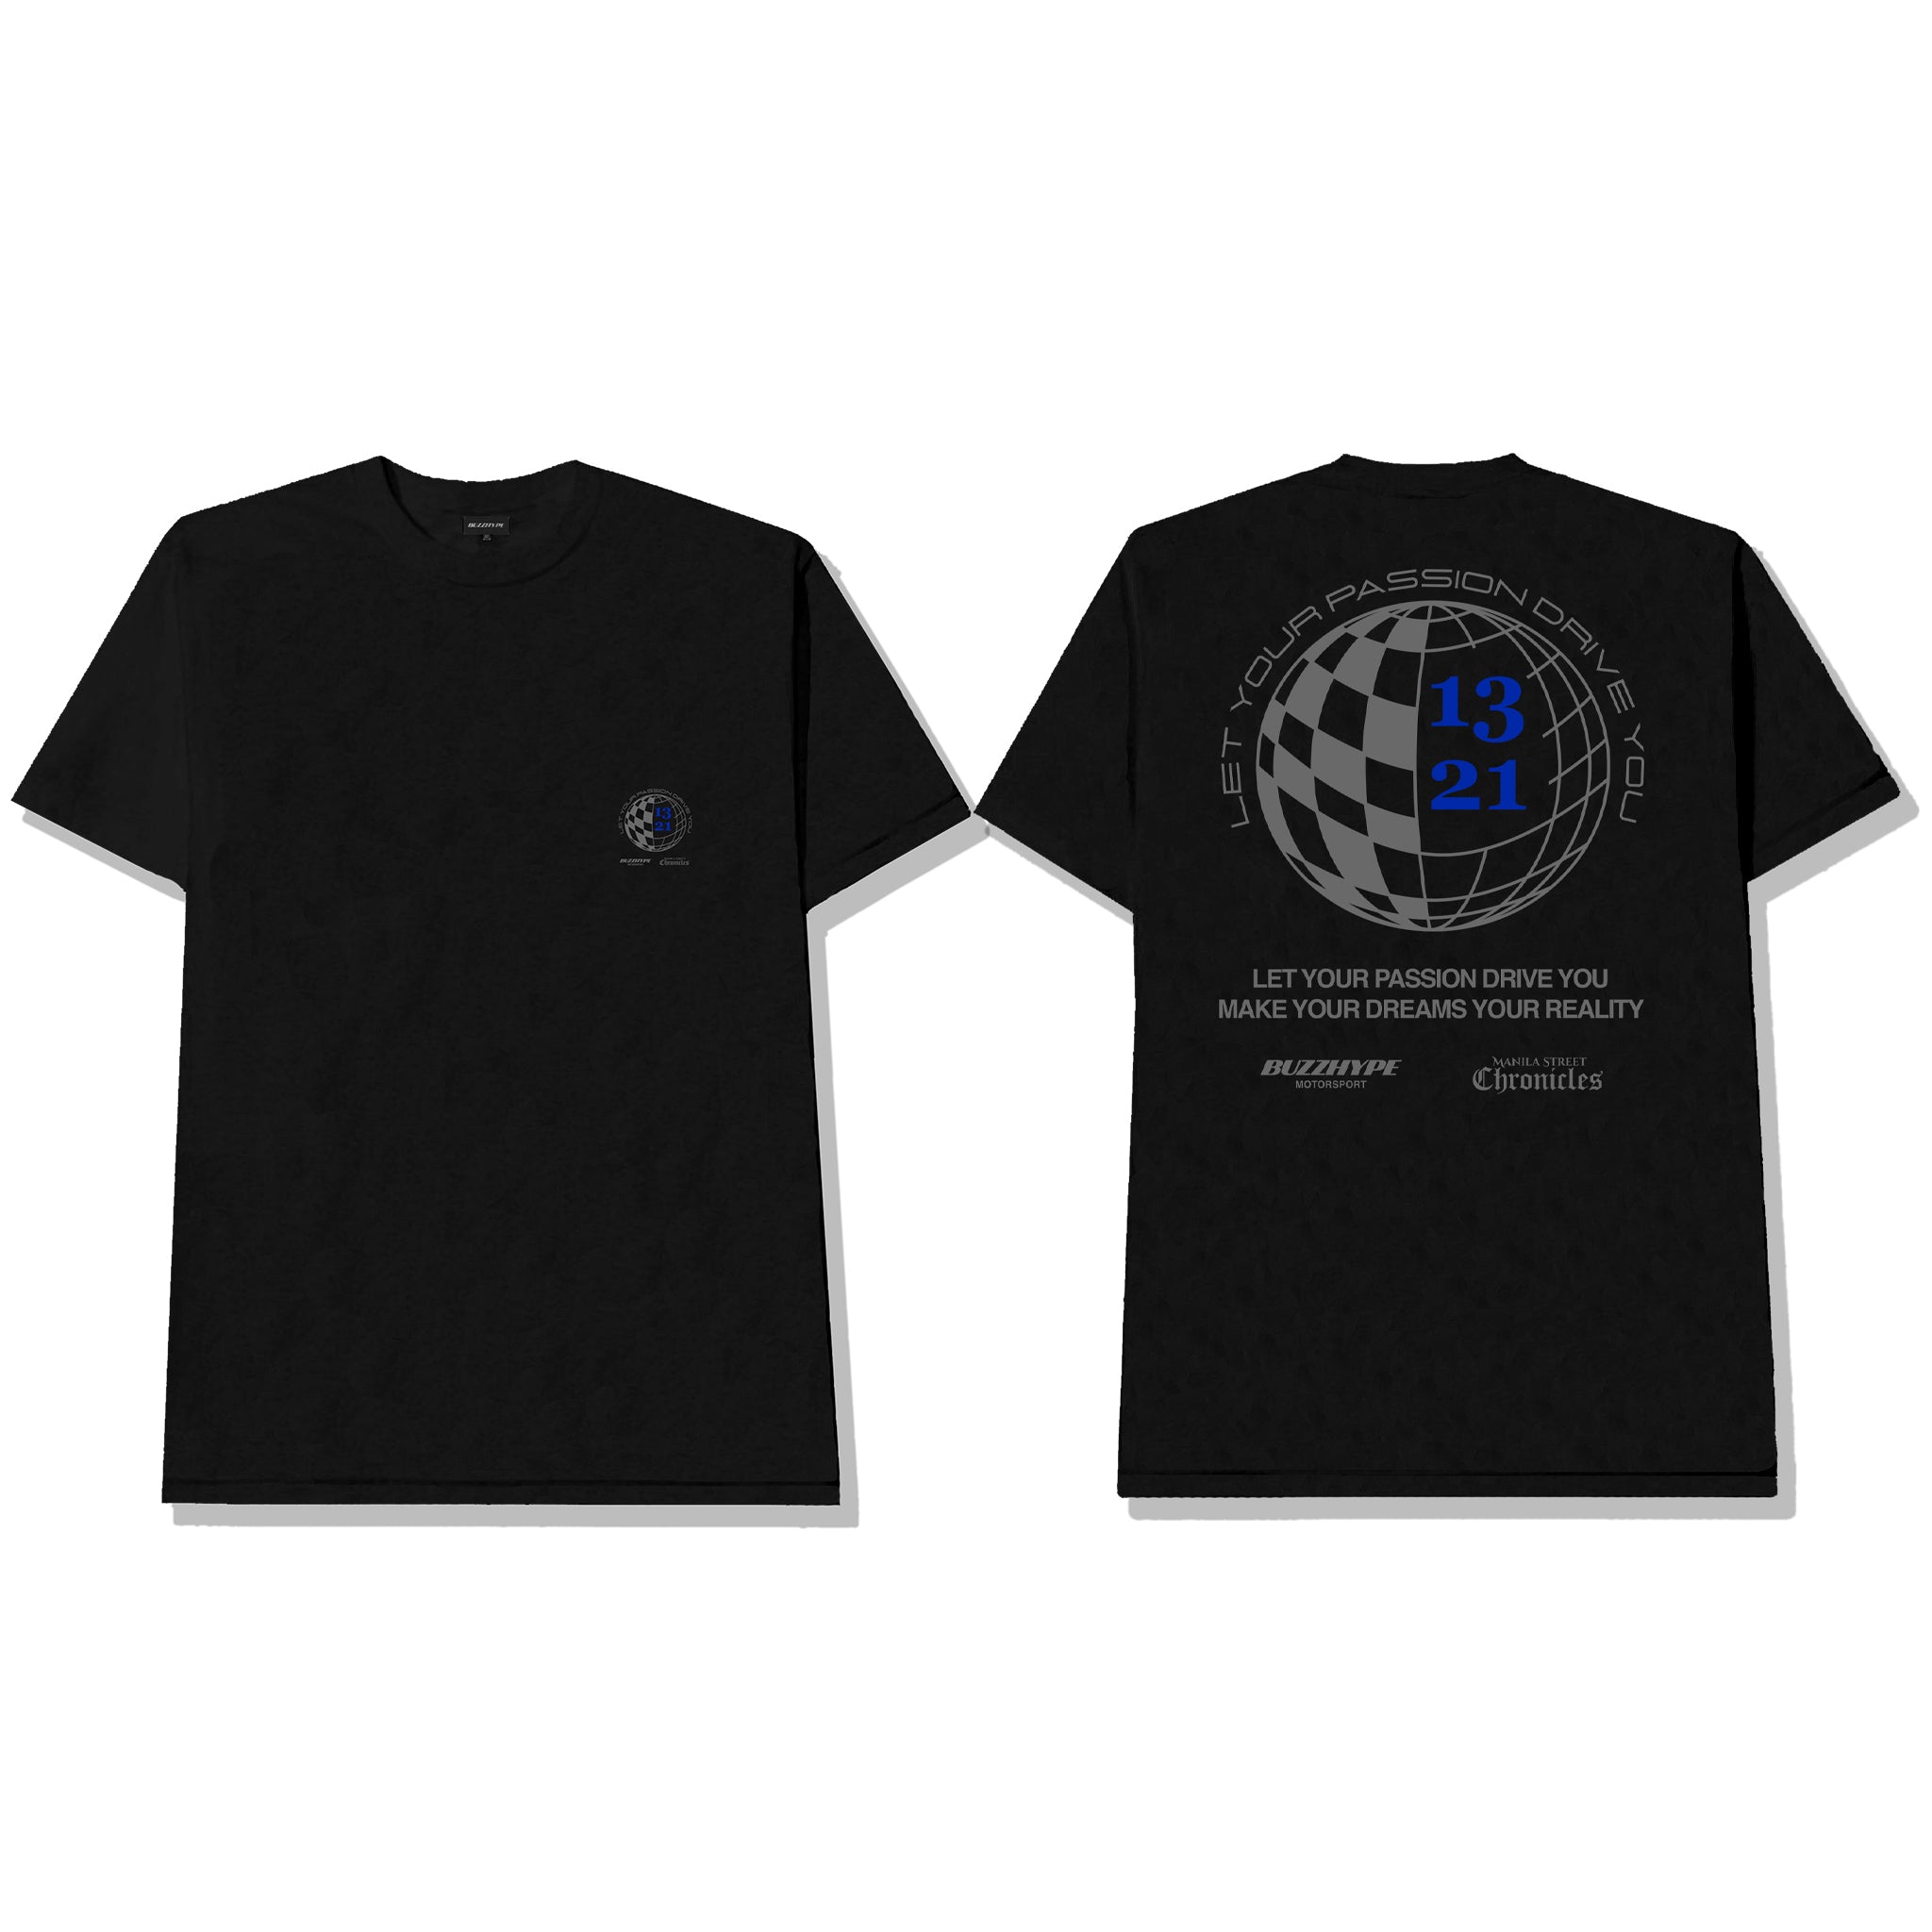 Manila Street Chronicles x BUZZHYPE Passion Driven in Black tee